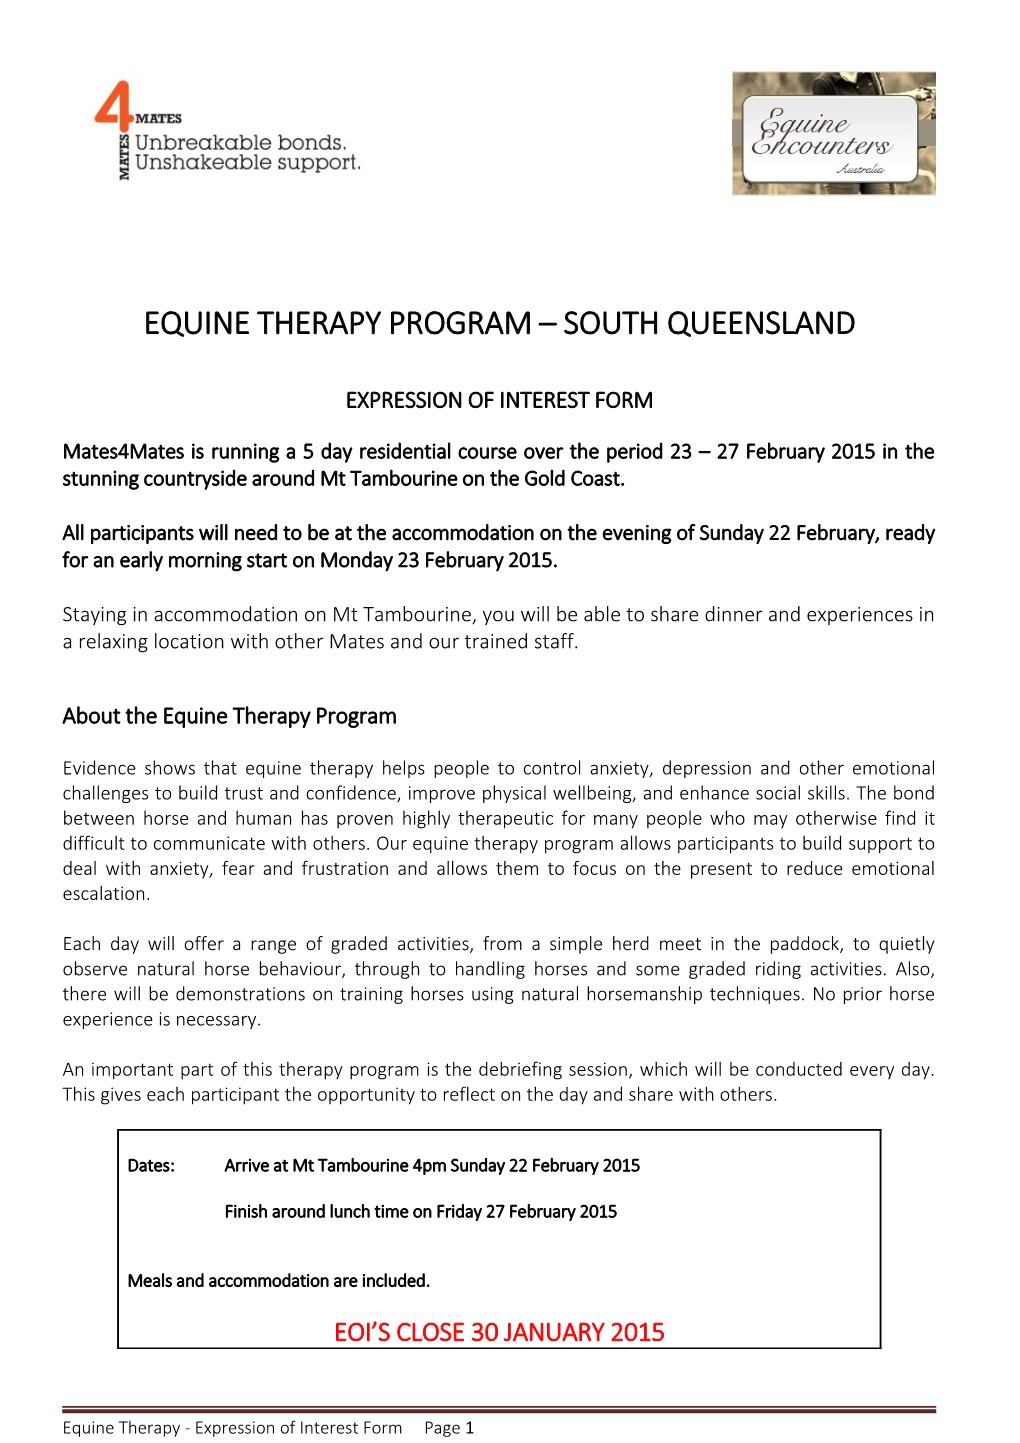 Equine Therapy Program South Queensland